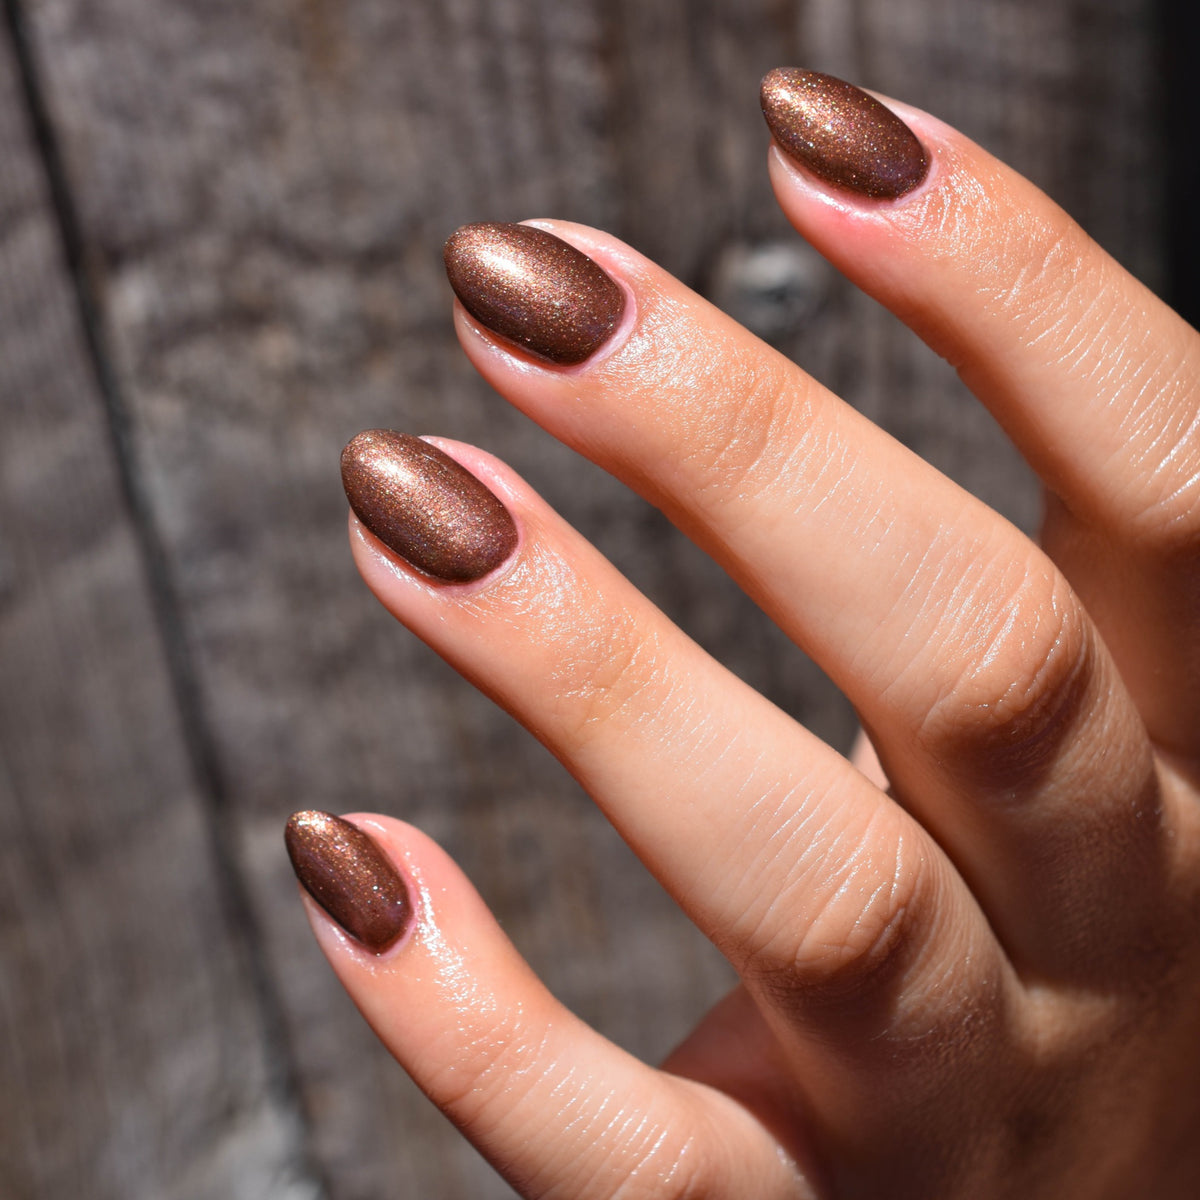 A close up of a mid toned hand comes into frame from the lower right hand corner showing four fingers with Falcon nail polish from Hello Birdie on the nails. The color is a metallic brown with sparkles and are illuminated by daylight. The background is an out of focus grey wood.